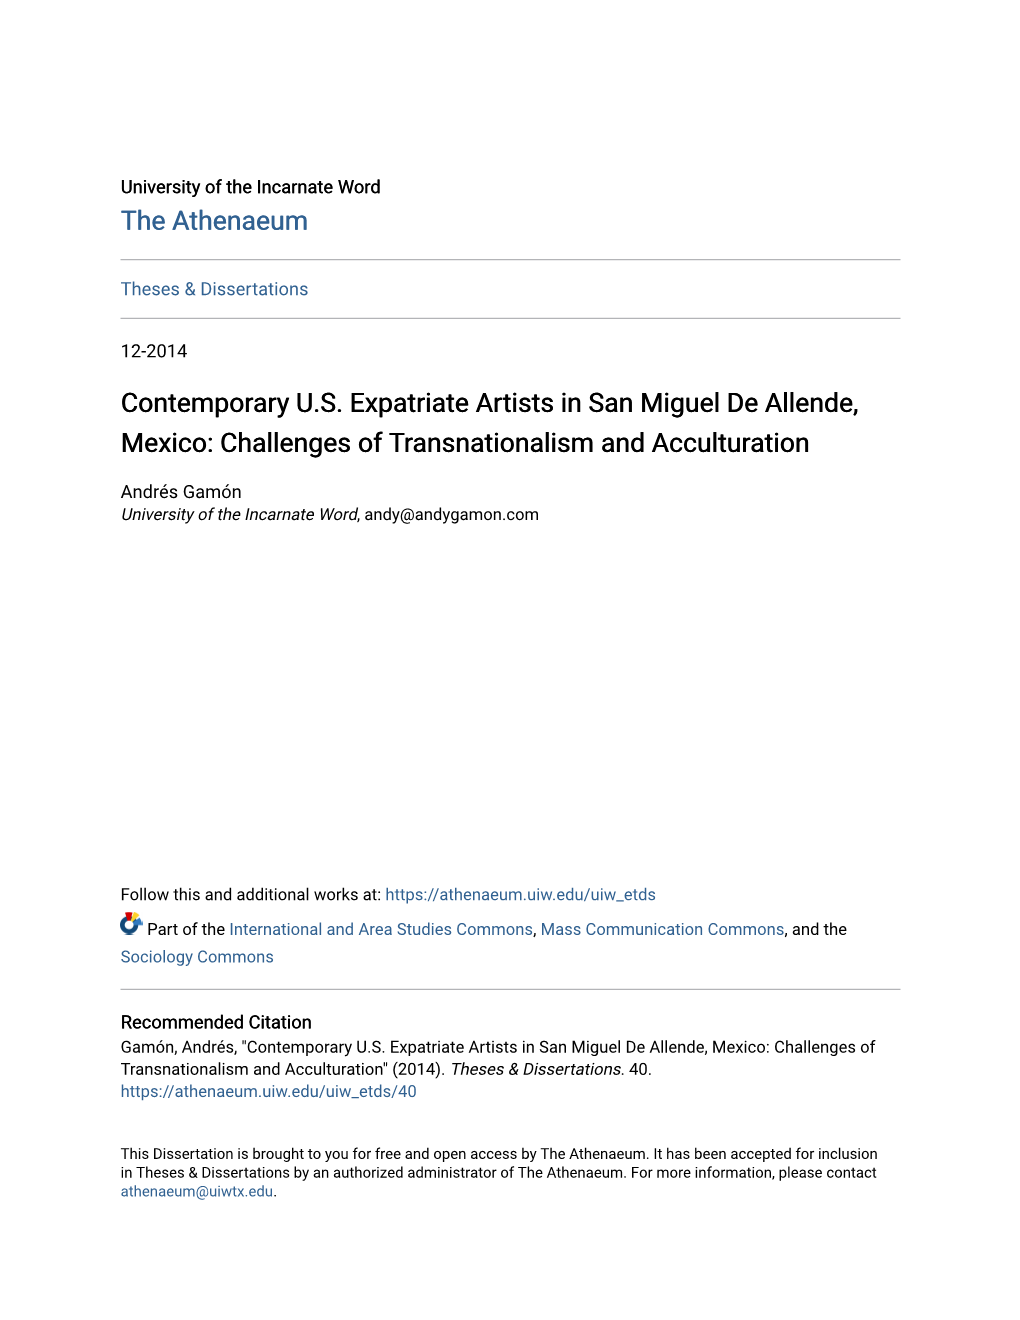 Contemporary U.S. Expatriate Artists in San Miguel De Allende, Mexico: Challenges of Transnationalism and Acculturation